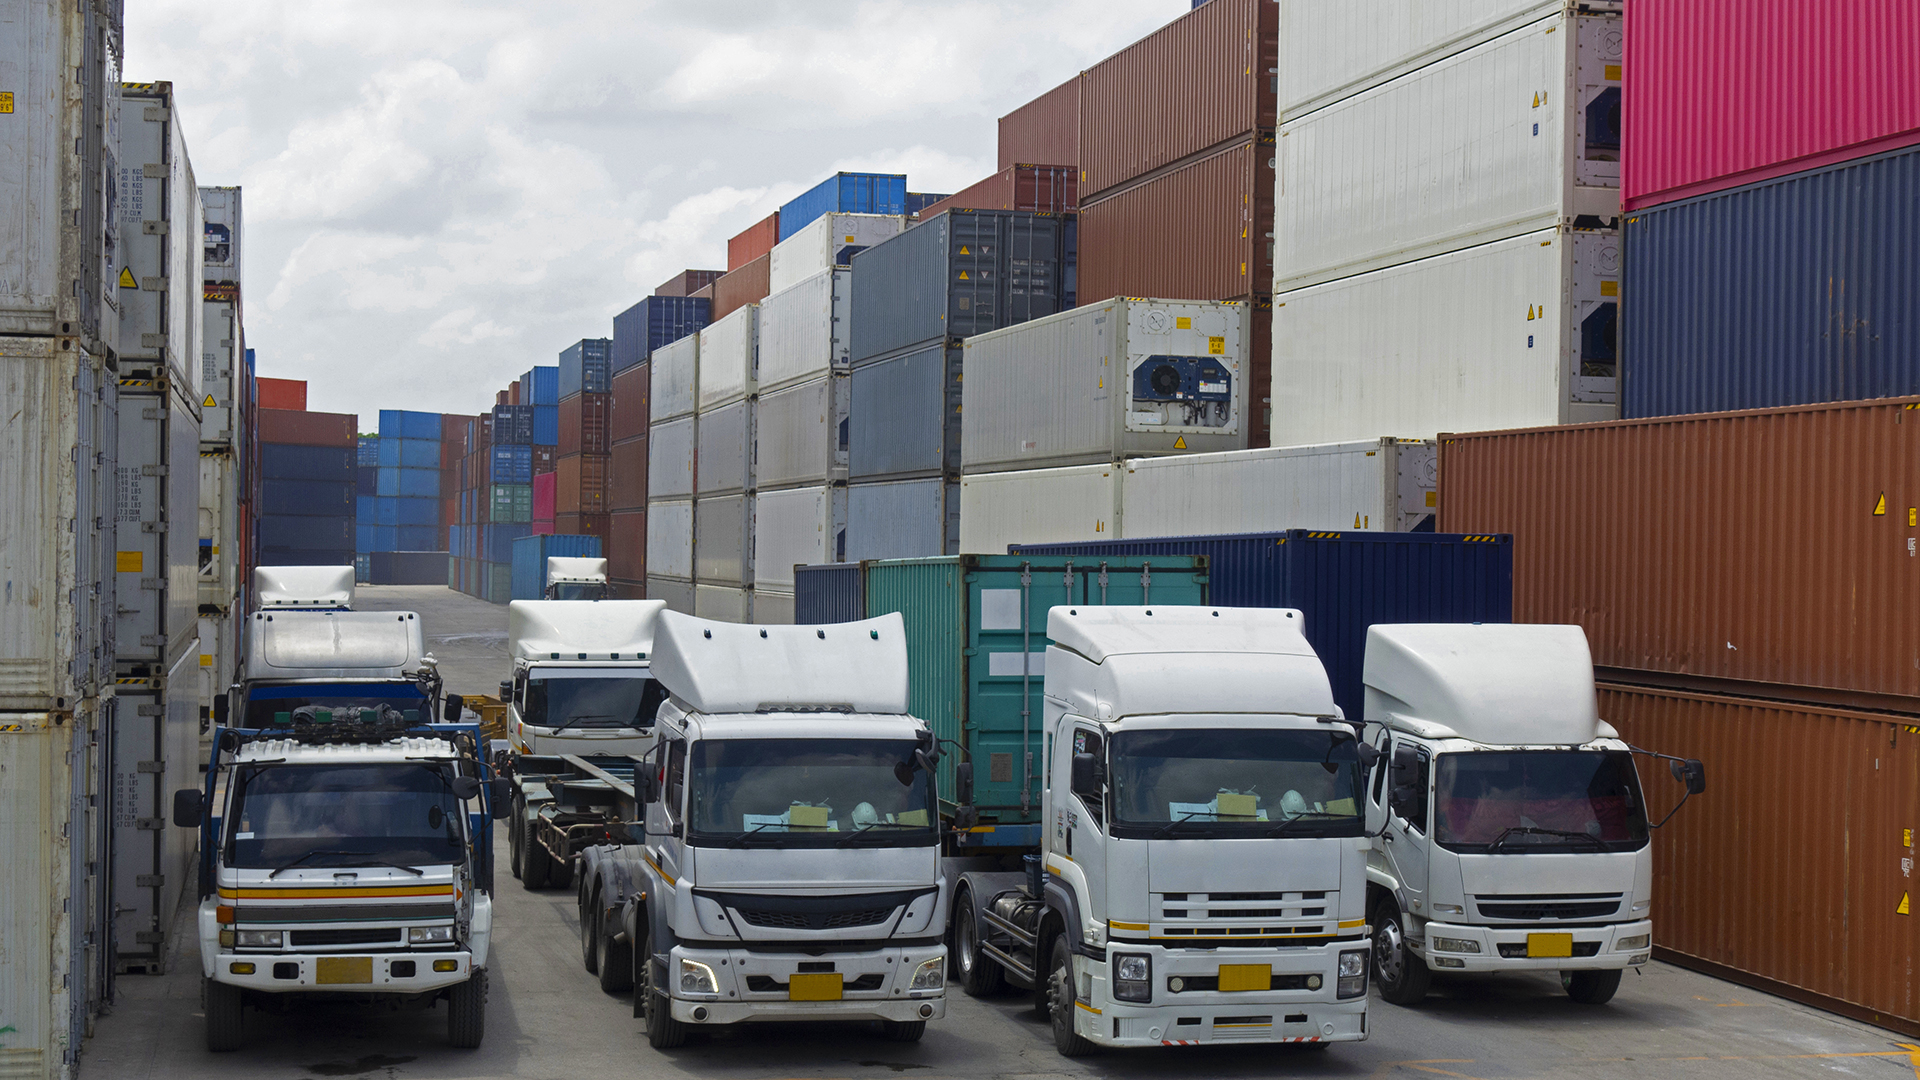 Trucks in front of containers